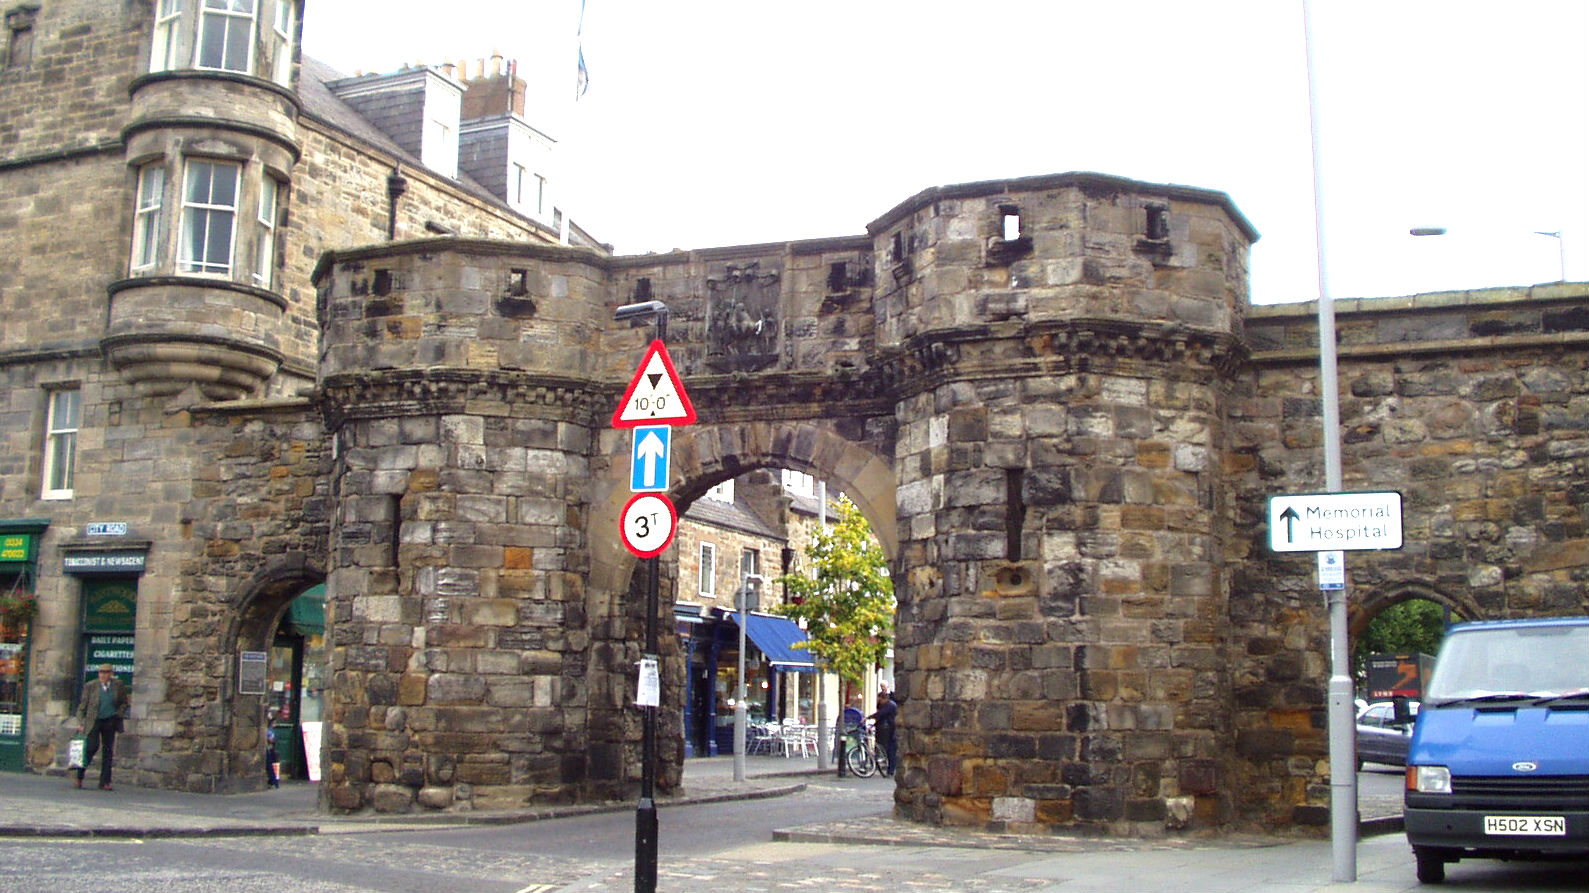 The West Gate of St. Andrews. (Credit: Jay Lloyd)